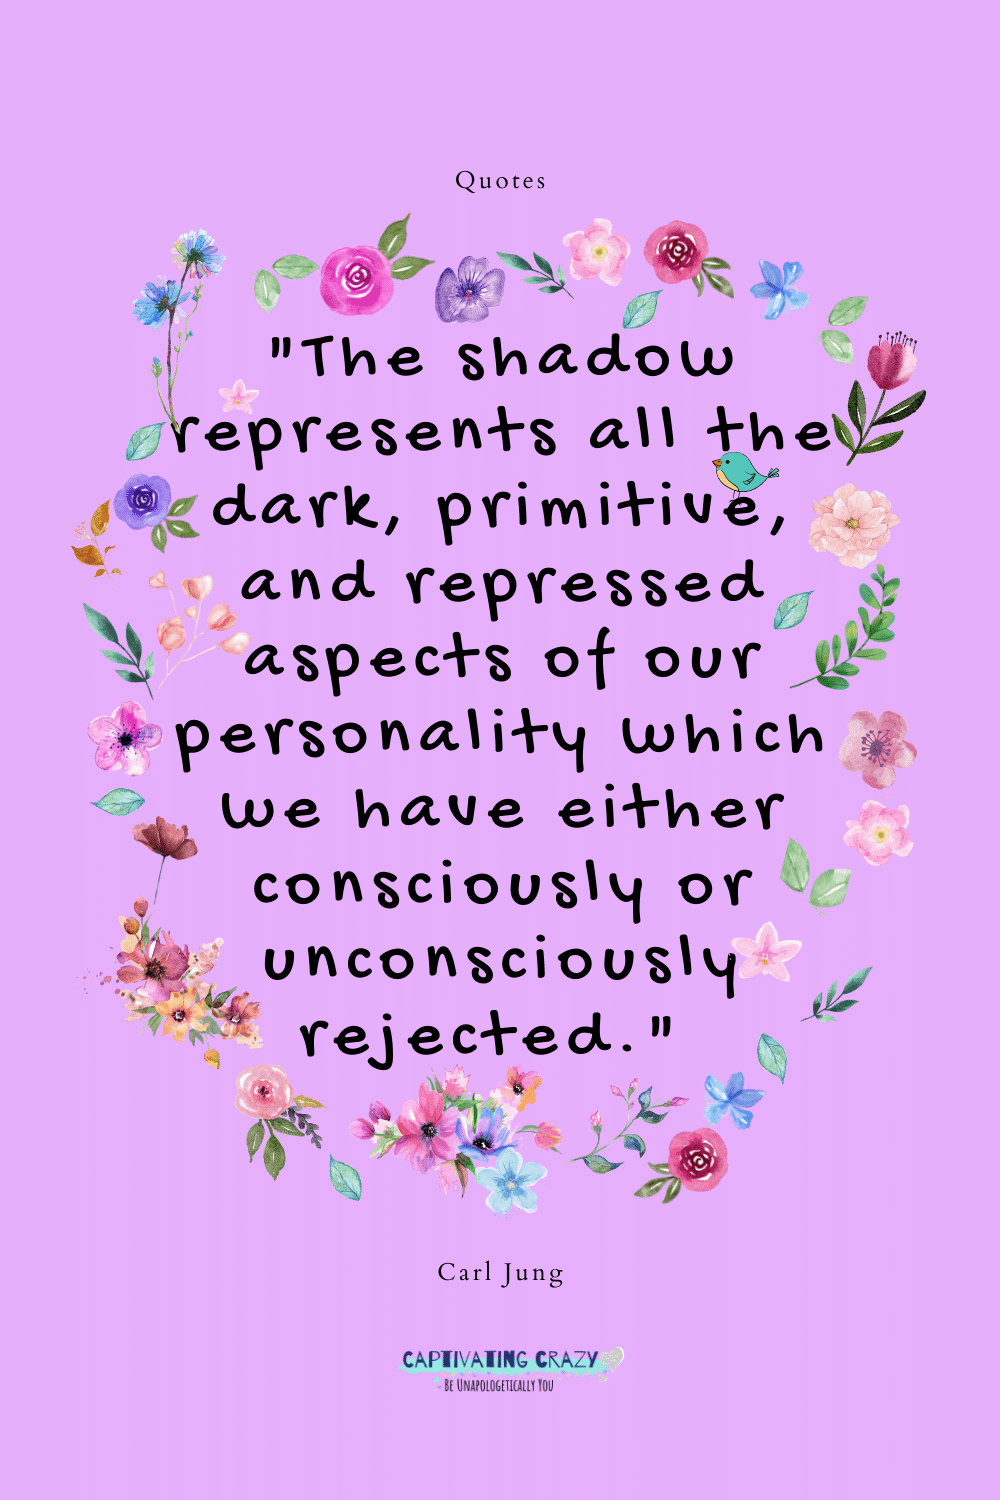 "The shadow represents all the dark, primitive, and repressed aspects of our personality which we have either consciously or unconsciously rejected." --Carl Jung, 